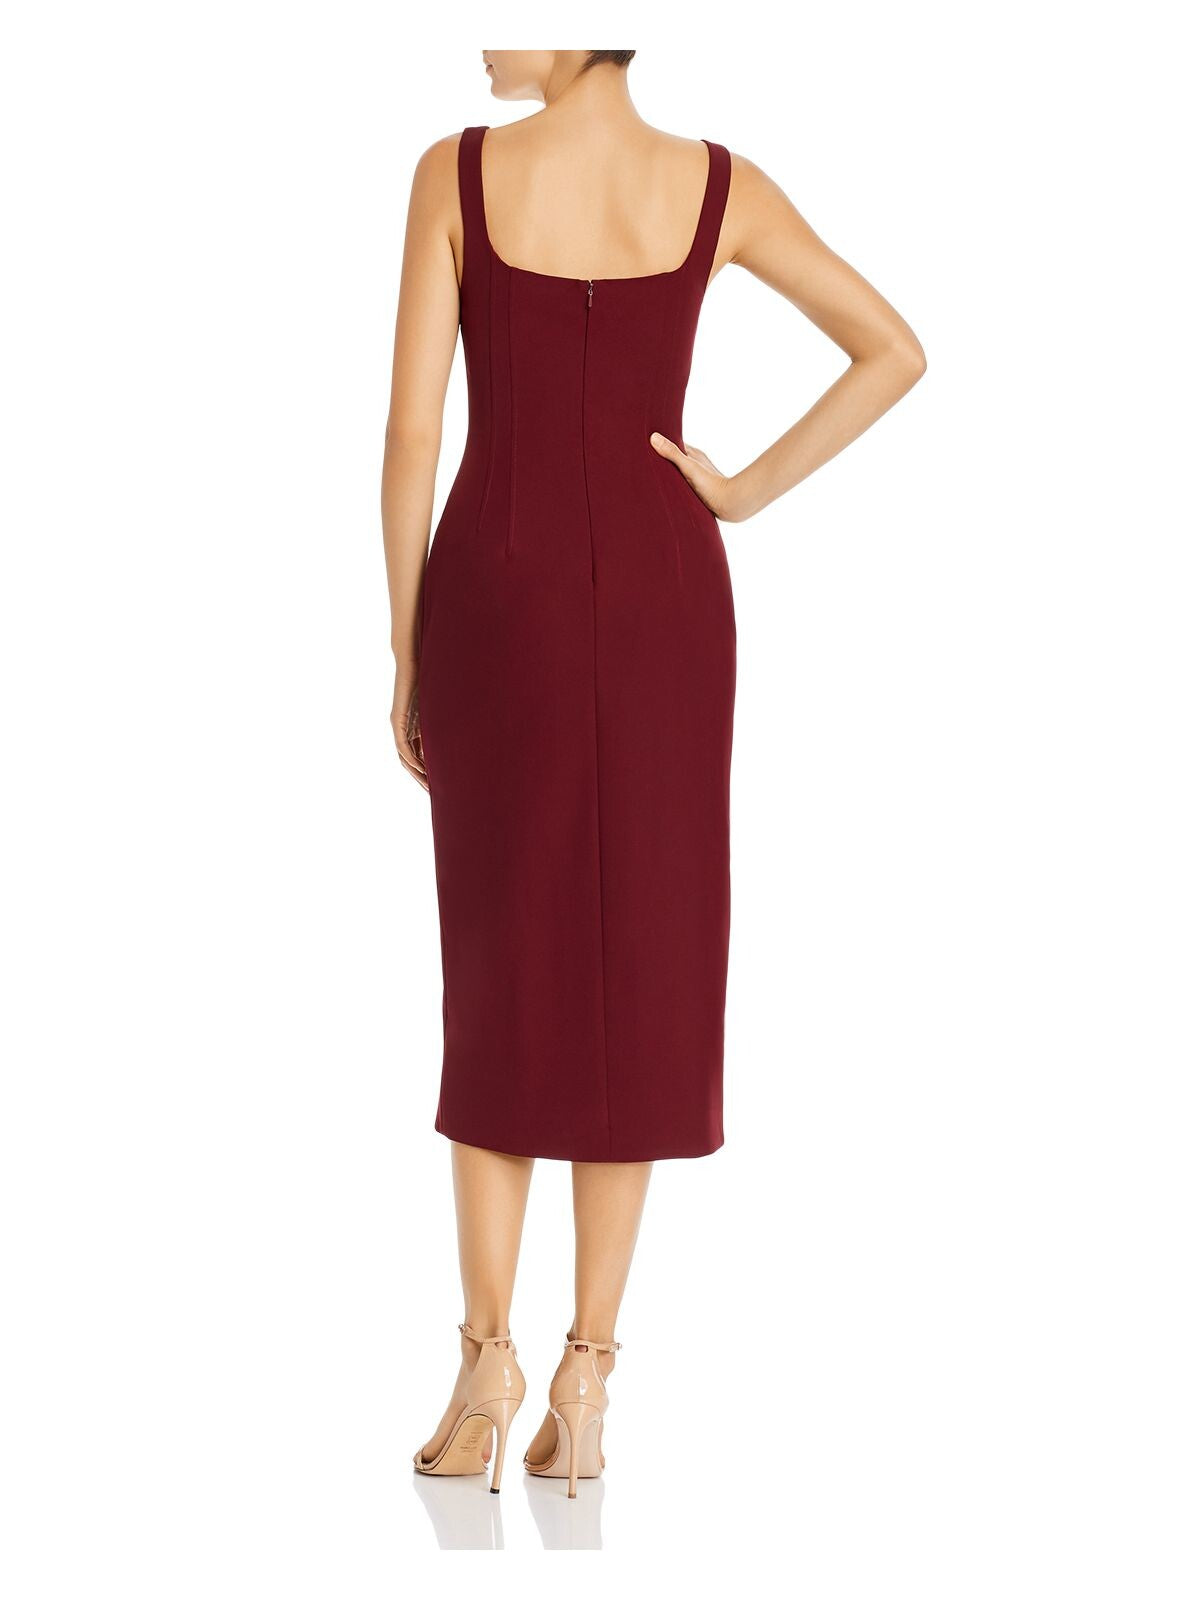 FAME AND PARTNERS Womens Maroon Spaghetti Strap Square Neck Below The Knee Evening Sheath Dress 14